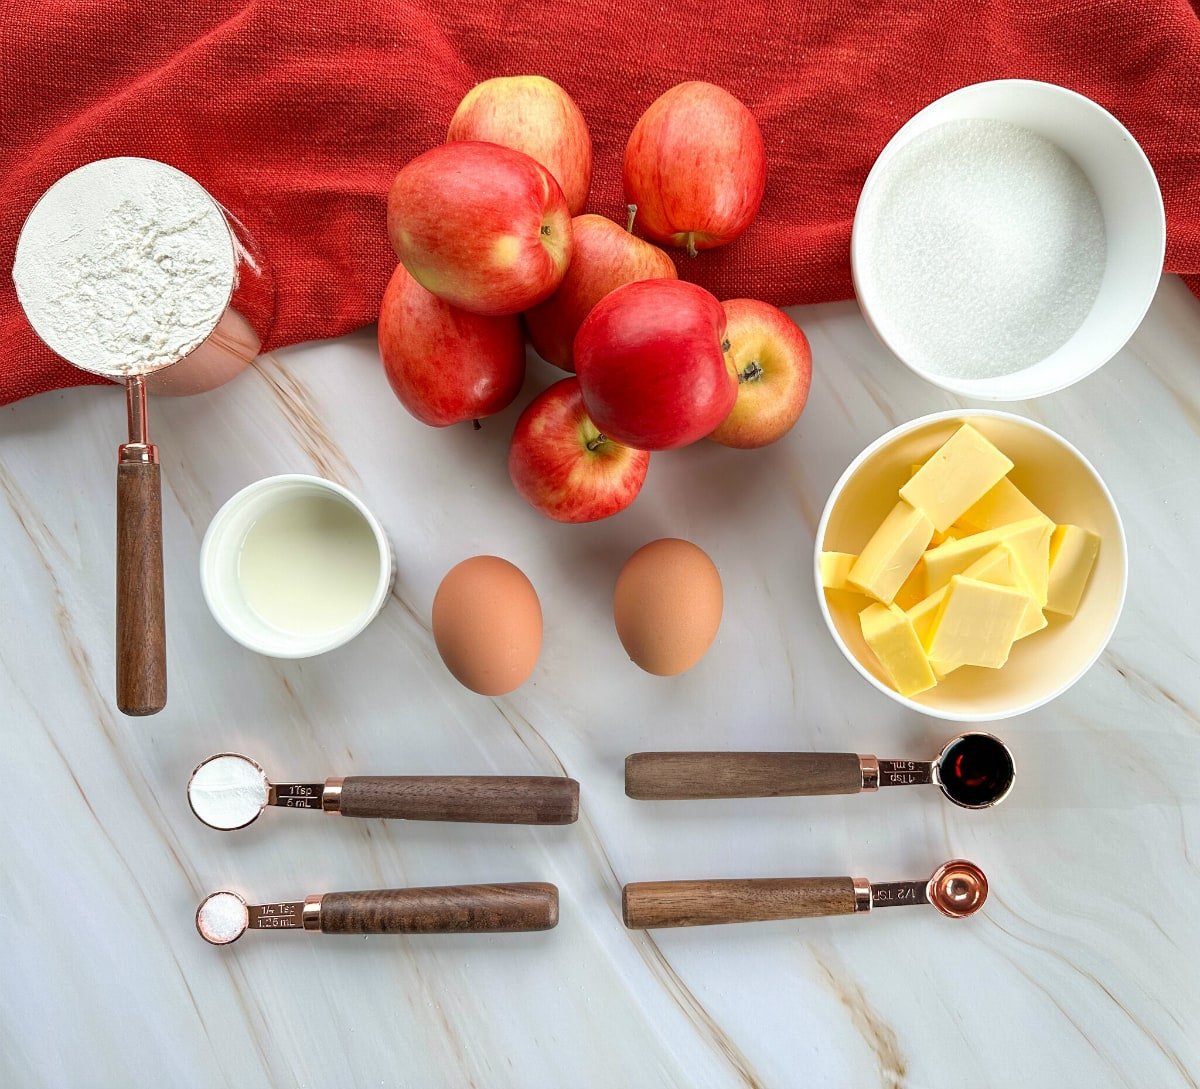 Ingredients used to make a french apple cake - see recipe card for full details 